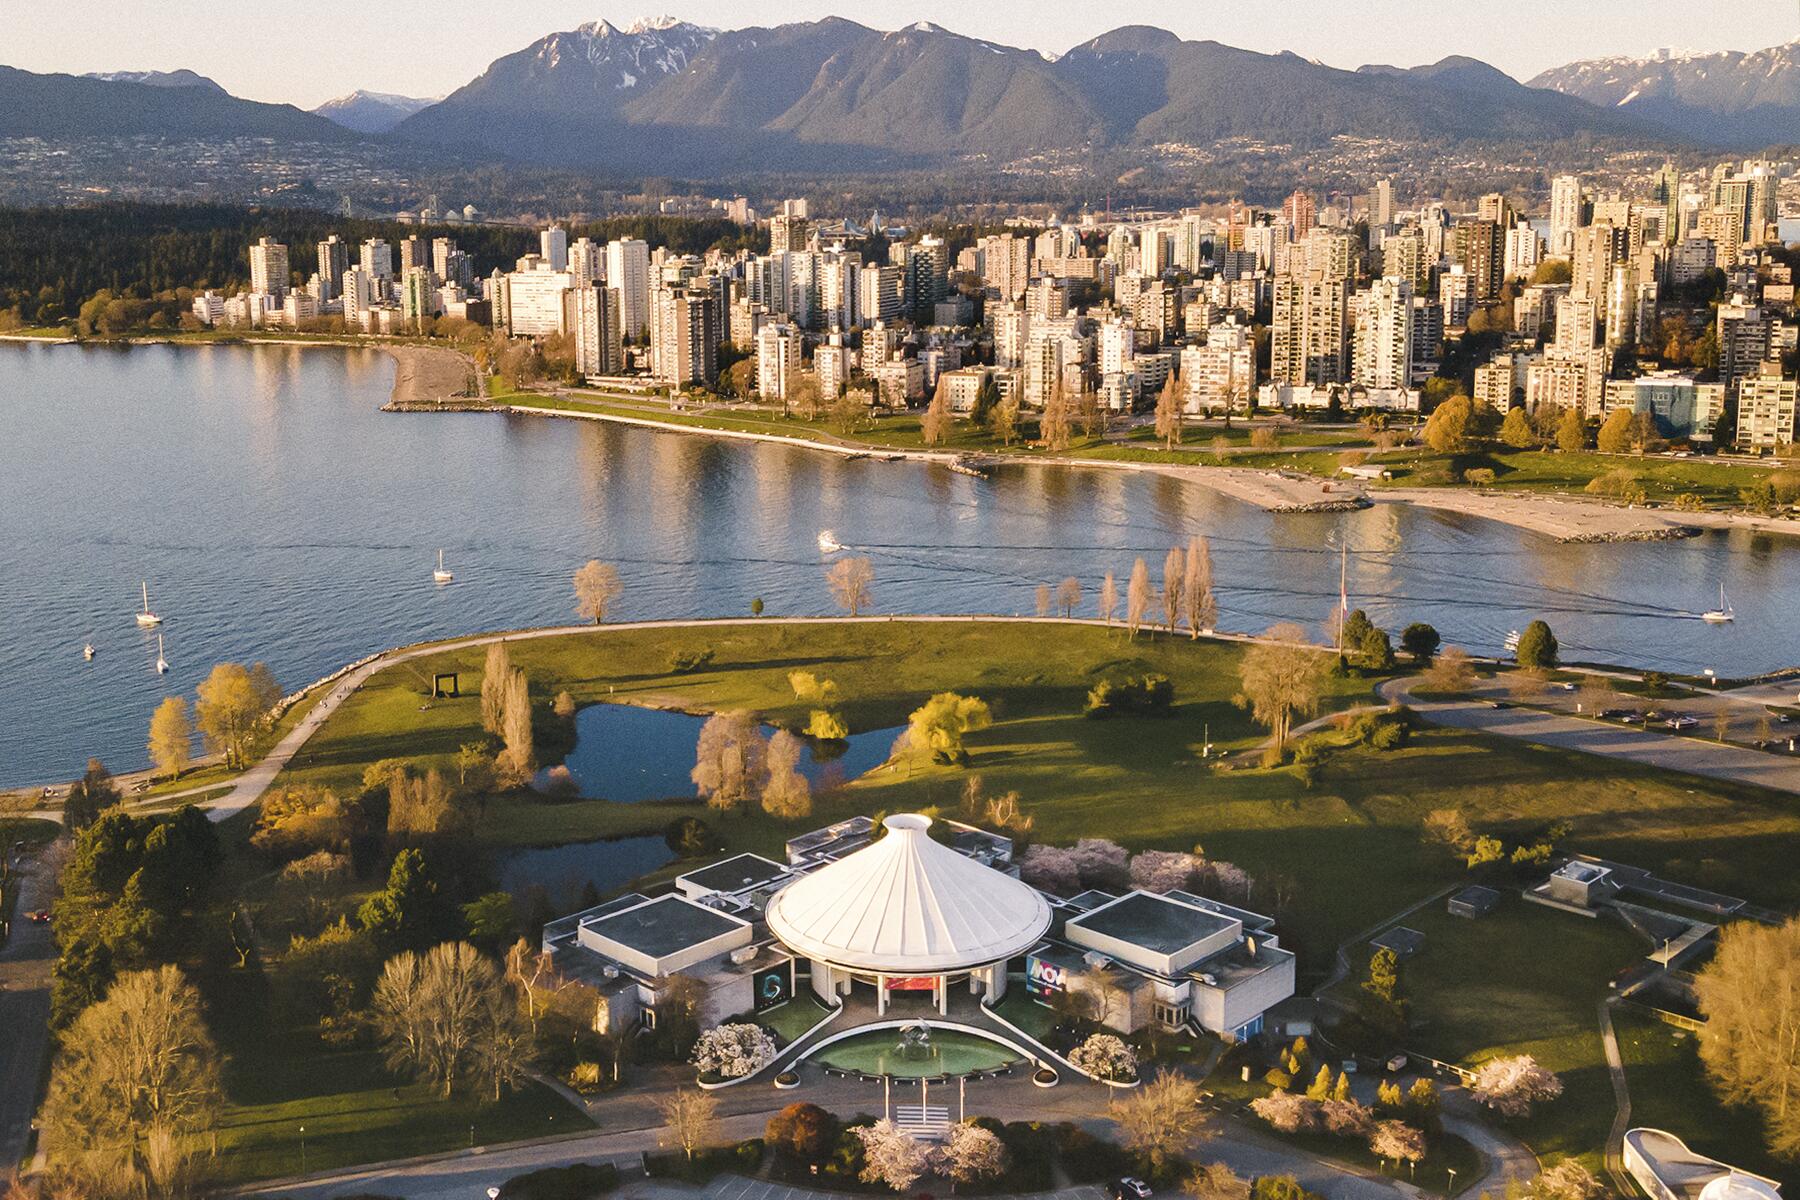 <a href='https://www.fodors.com/world/north-america/canada/british-columbia/vancouver/experiences/news/photos/best-cultural-attractions-to-see-when-visiting-vancouver-canada#'>From &quot;The 8 Best Cultural Attractions in Vancouver&quot;</a>